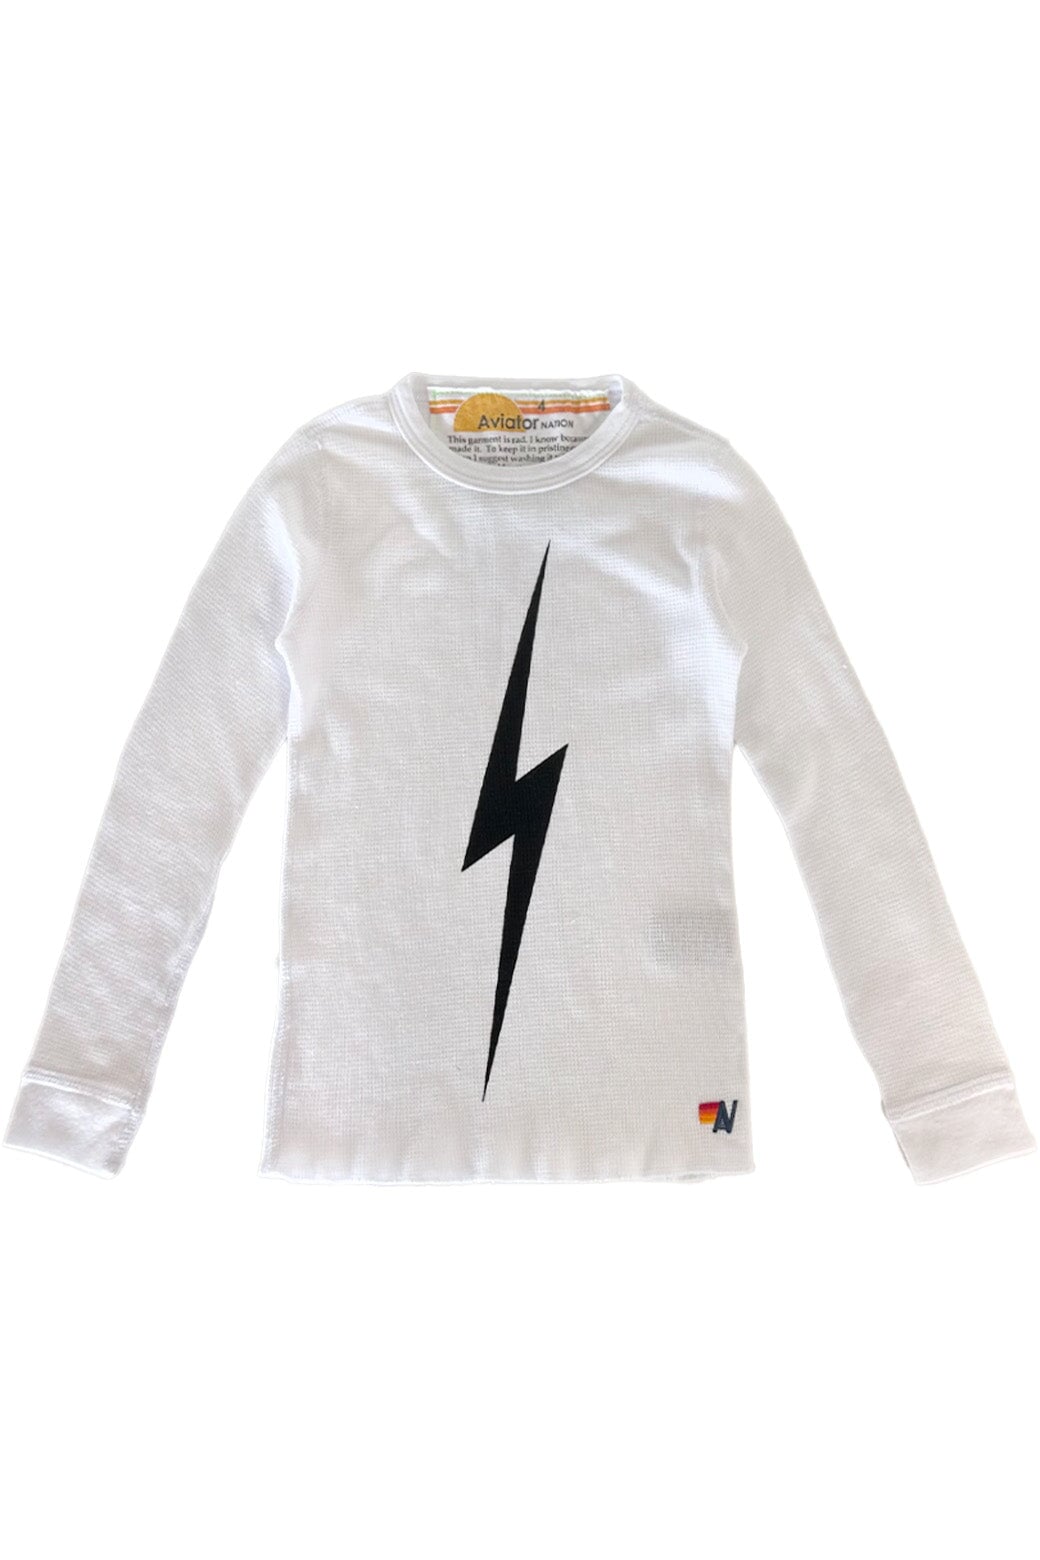 KID'S BOLT THERMAL - WHITE Kid's Thermal Aviator Nation 